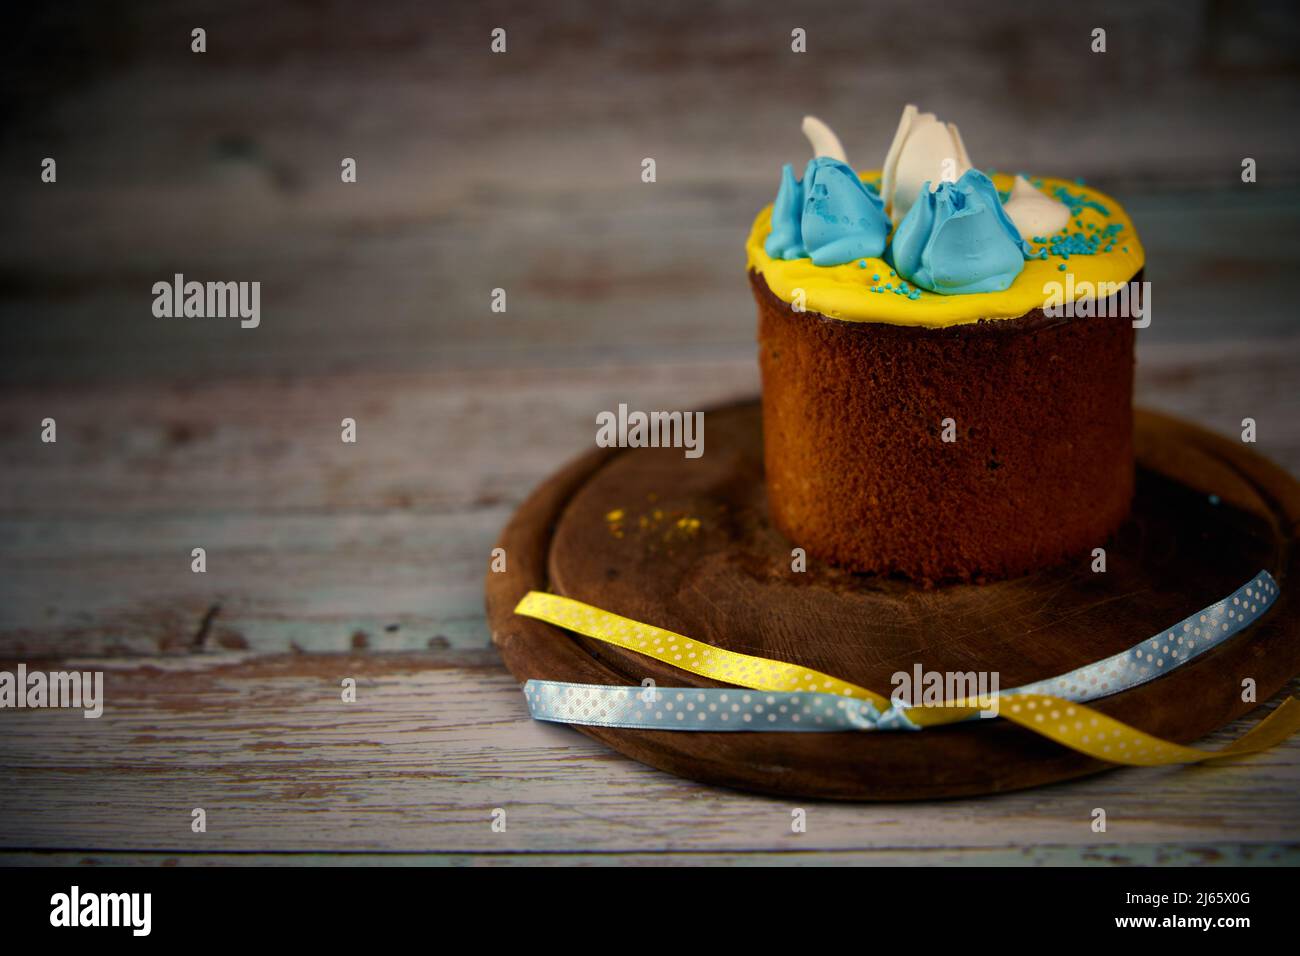 Easter board. Easter cake with cream decorated  in the colors of the Ukrainian flag on a wooden board Stock Photo